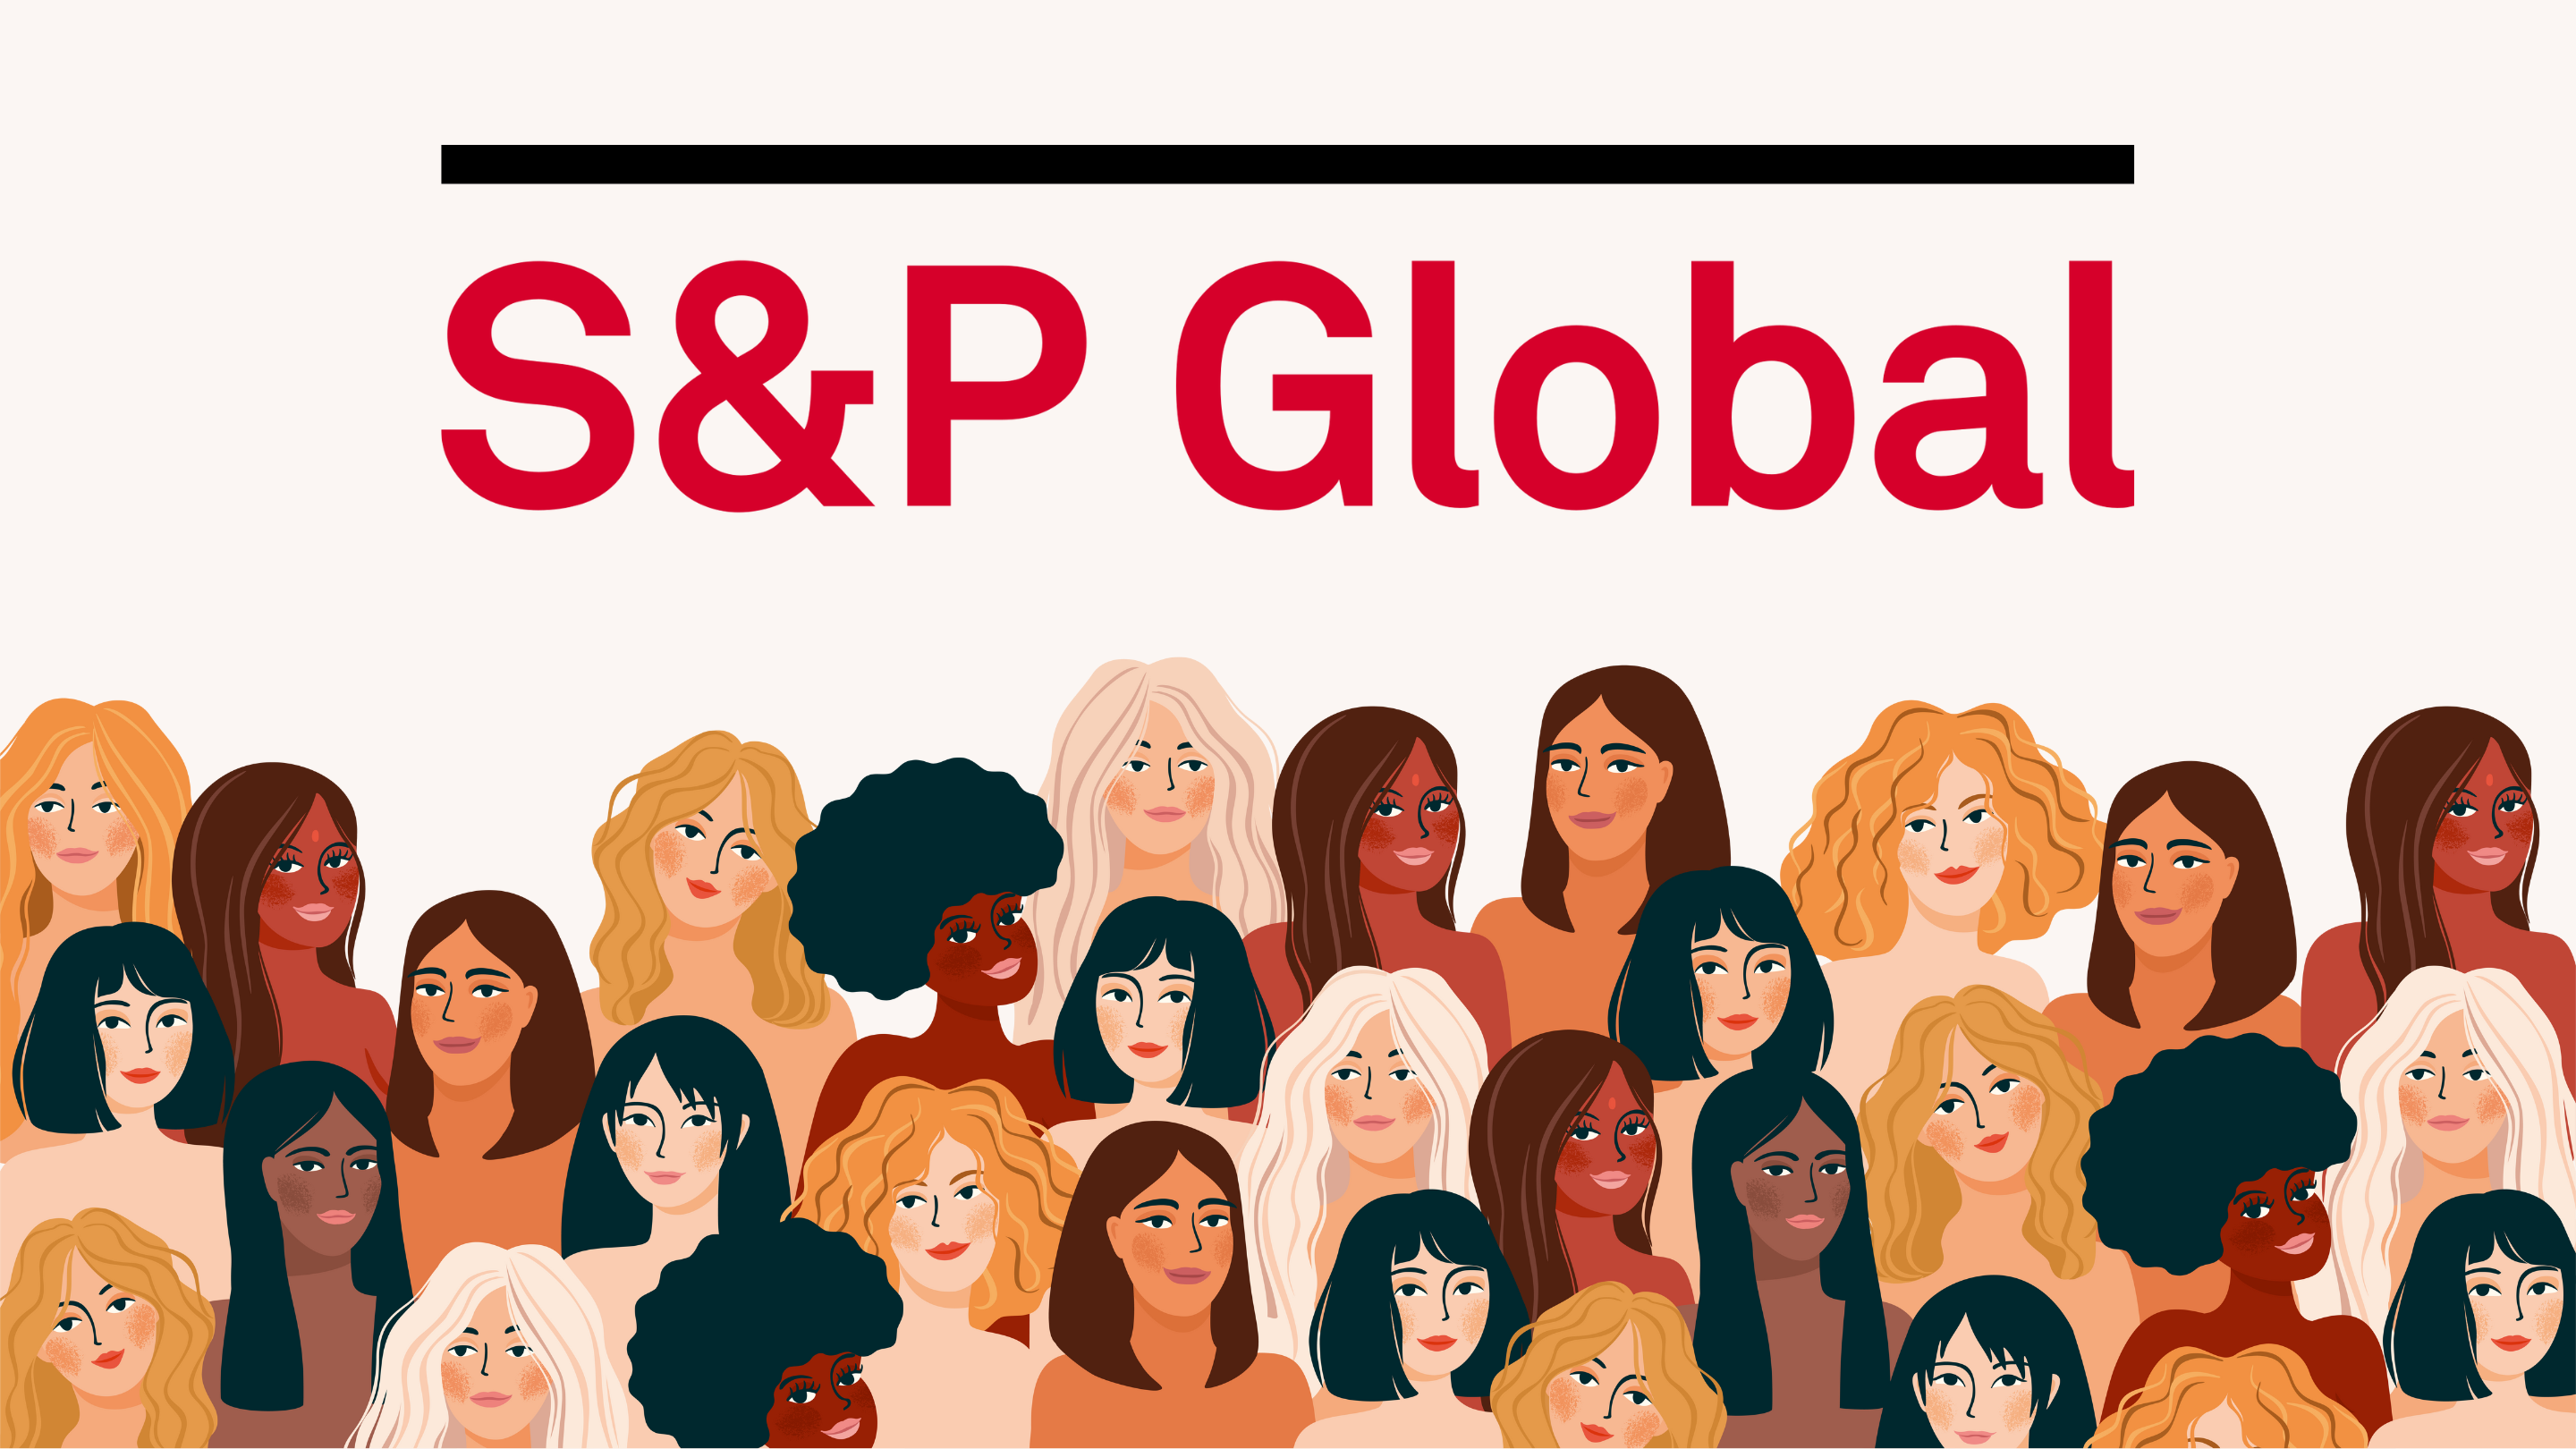 S&P Global Gender Diversity In the Workplace